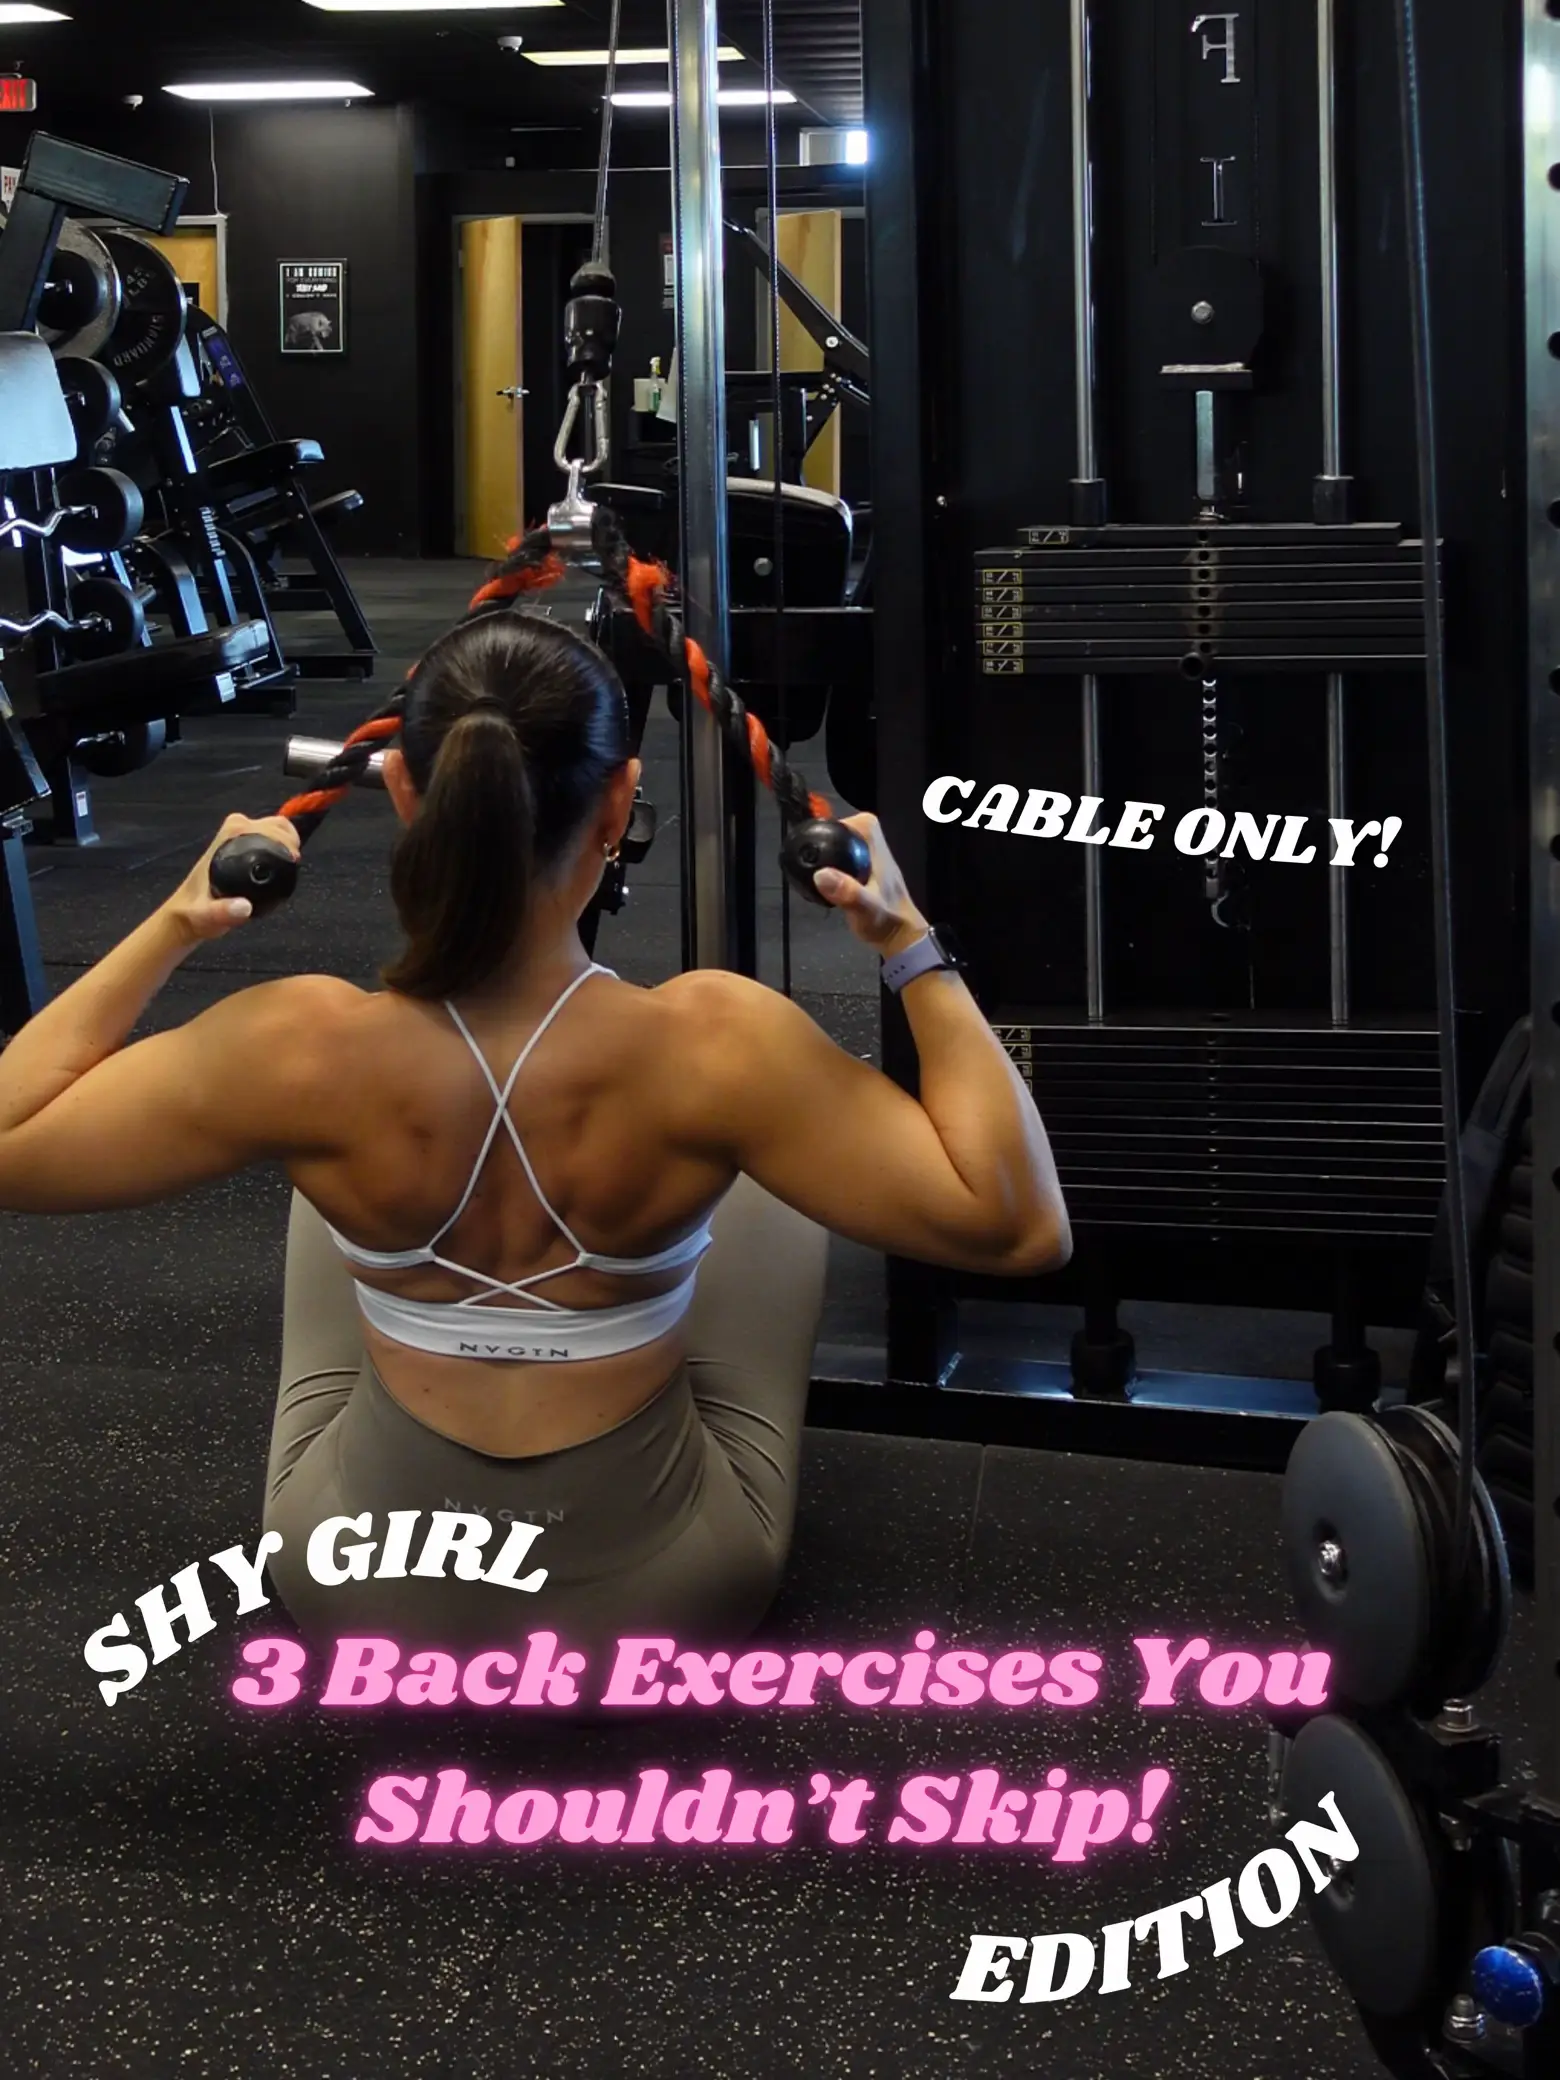 3 BACK EXERCISES YOU SHOULDN'T SKIP - cable only!